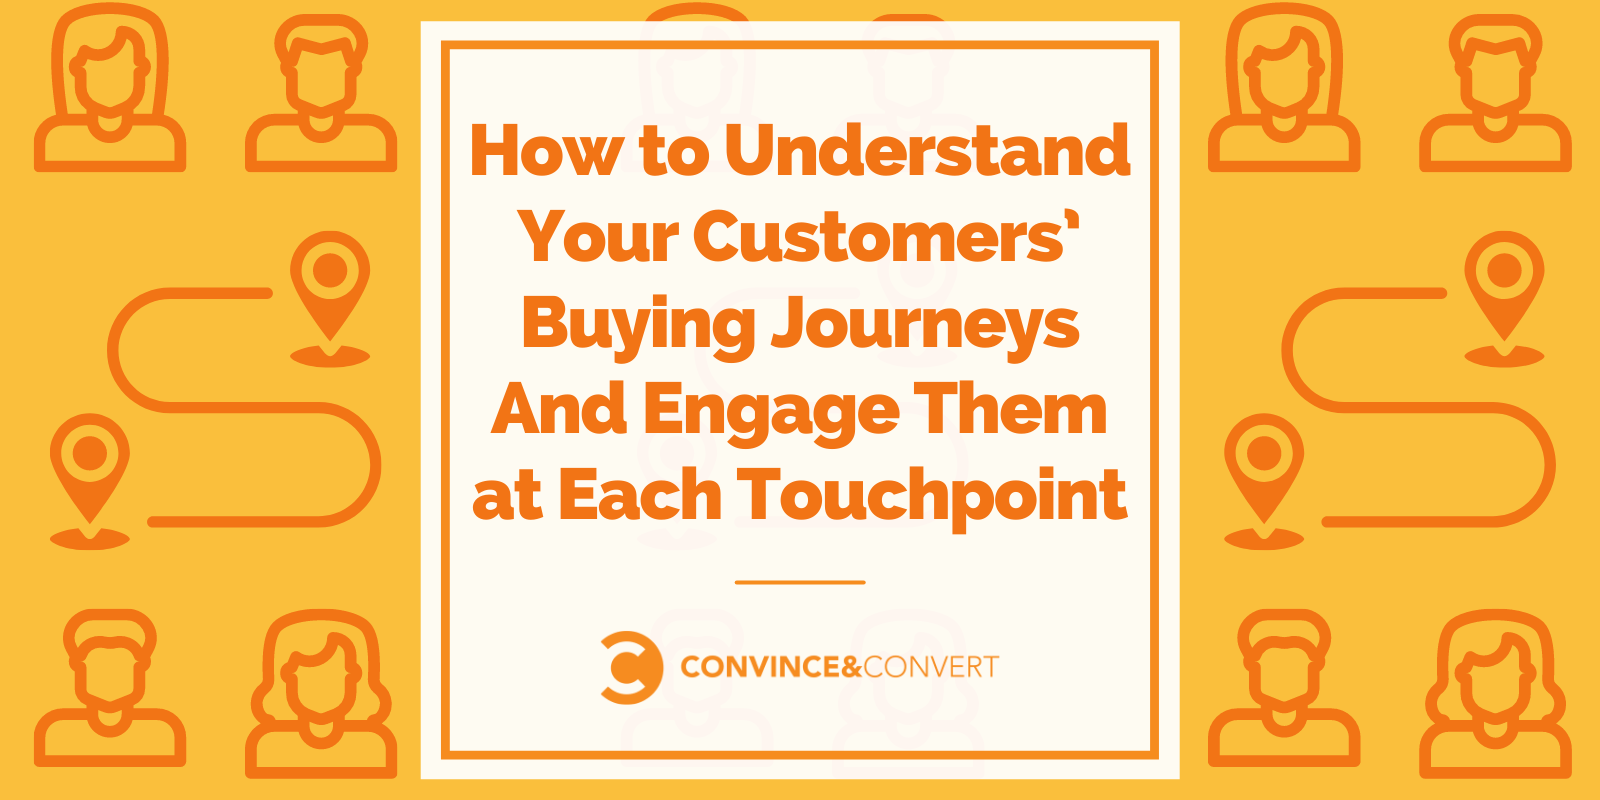 Easy learn how to Perceive Your Customers’ Shopping Journeys And Take Them at Every Touchpoint